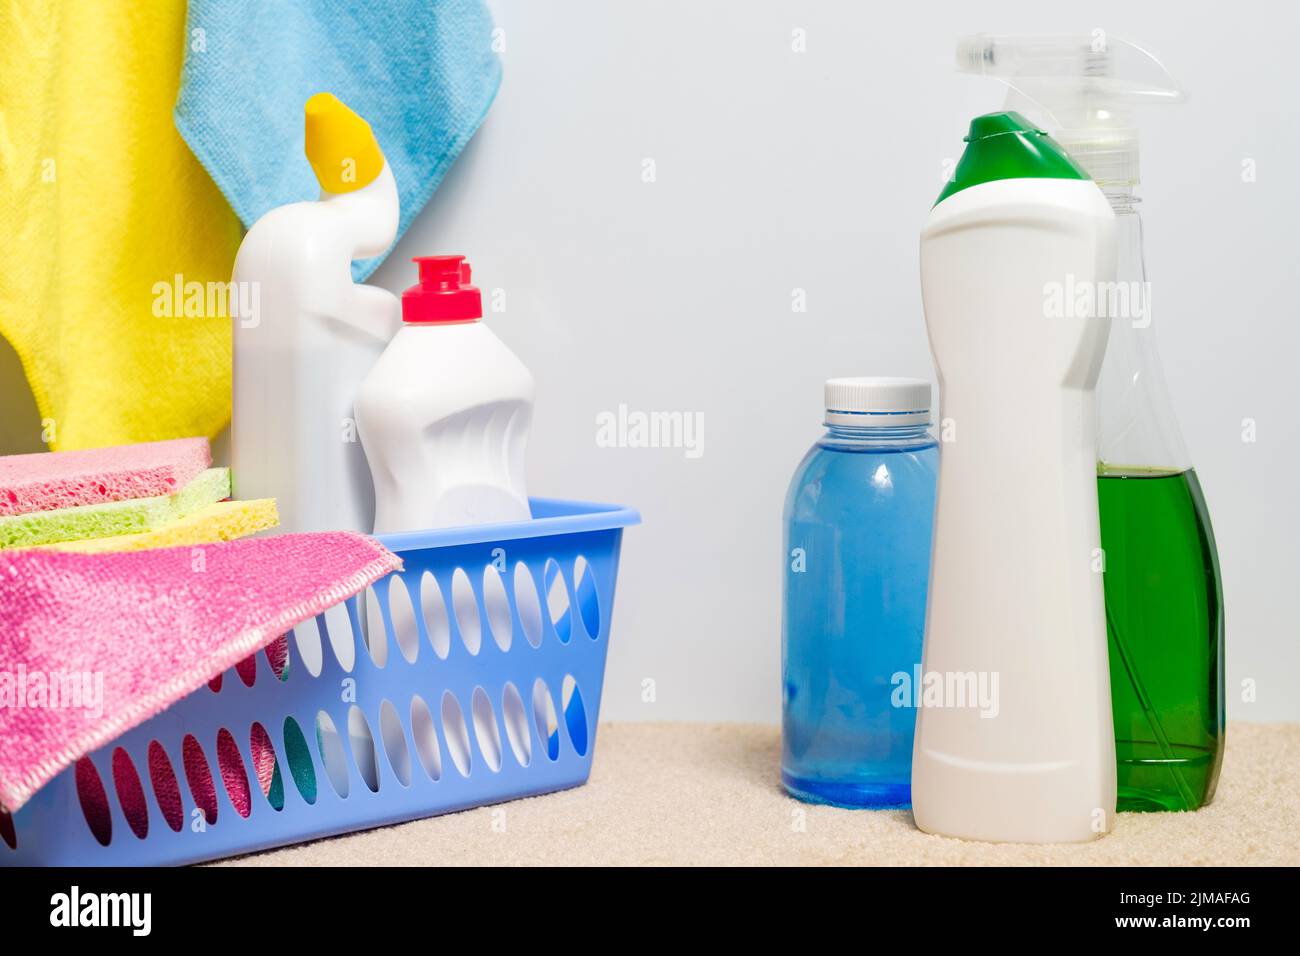 housekeeping diy cleanup cleaning supplies Stock Photo